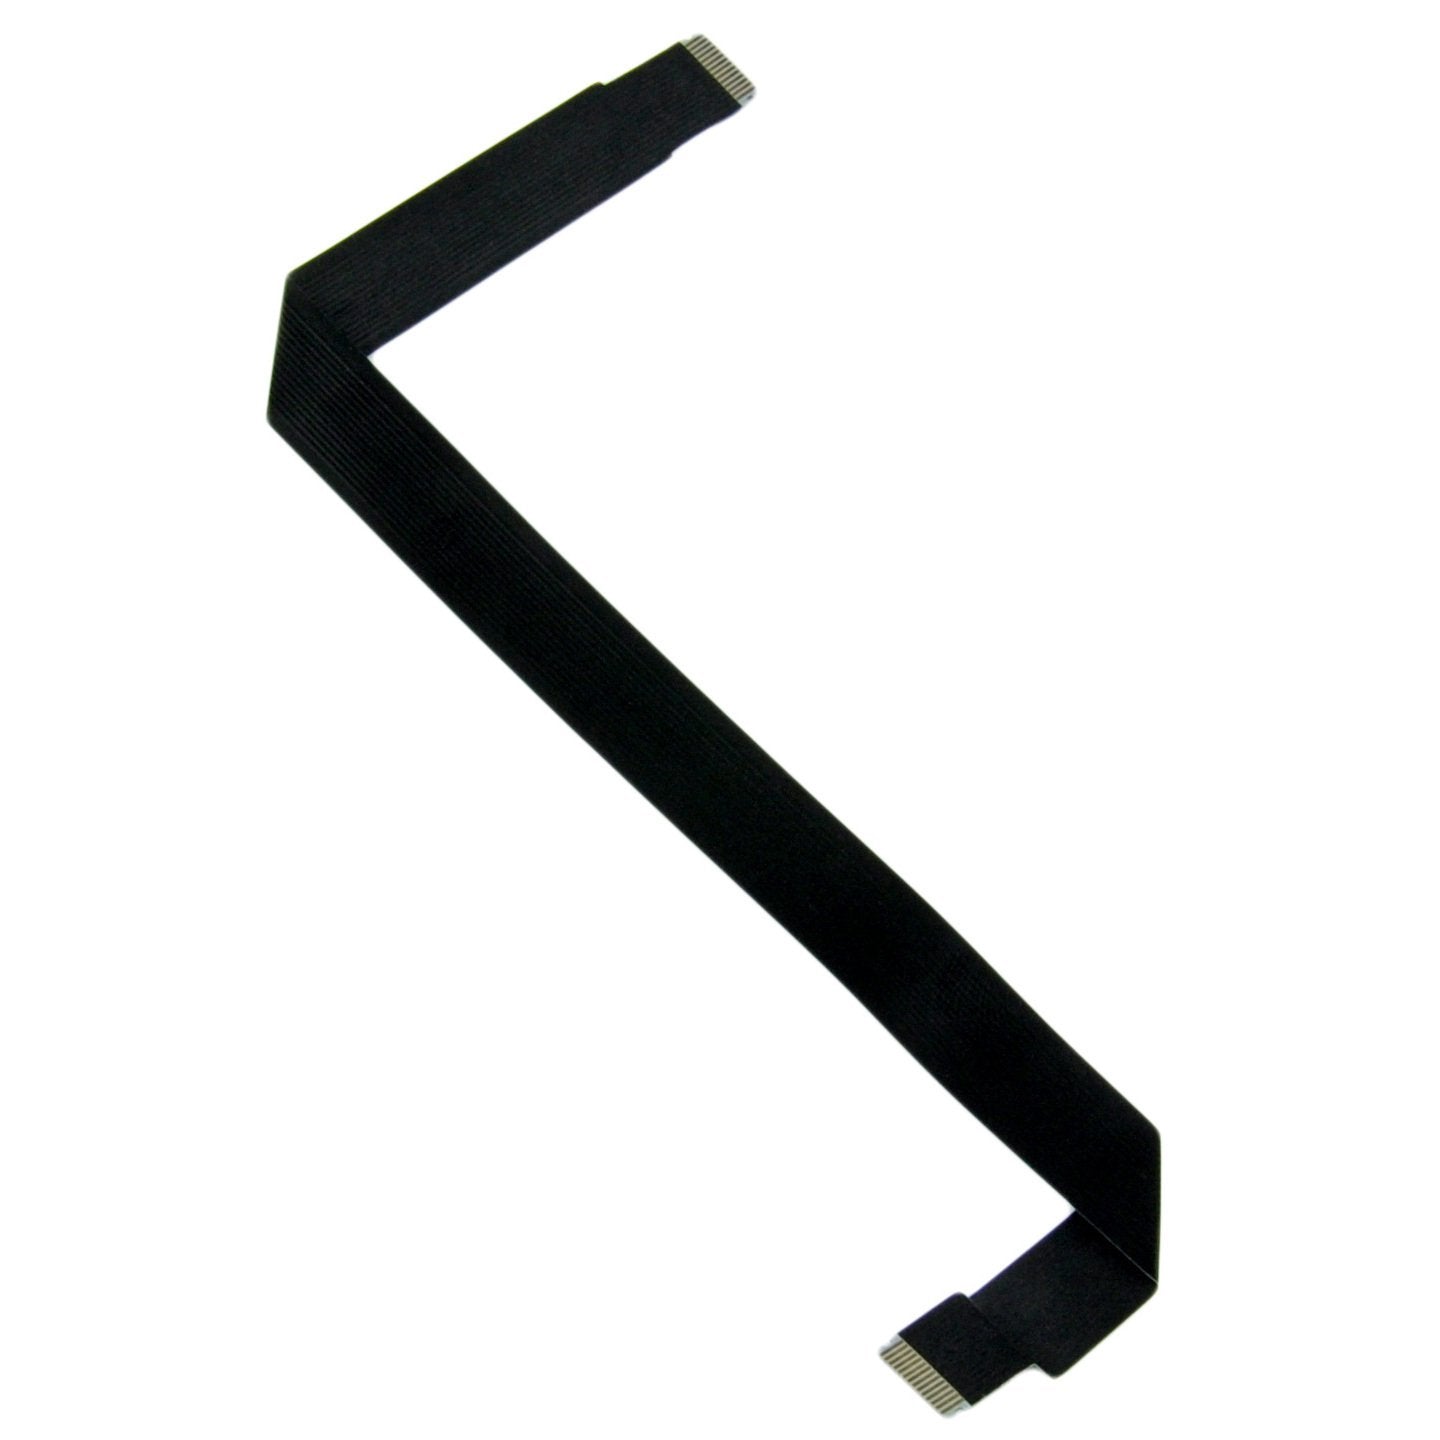 MacBook Air 11" (Late 2010) Trackpad Cable